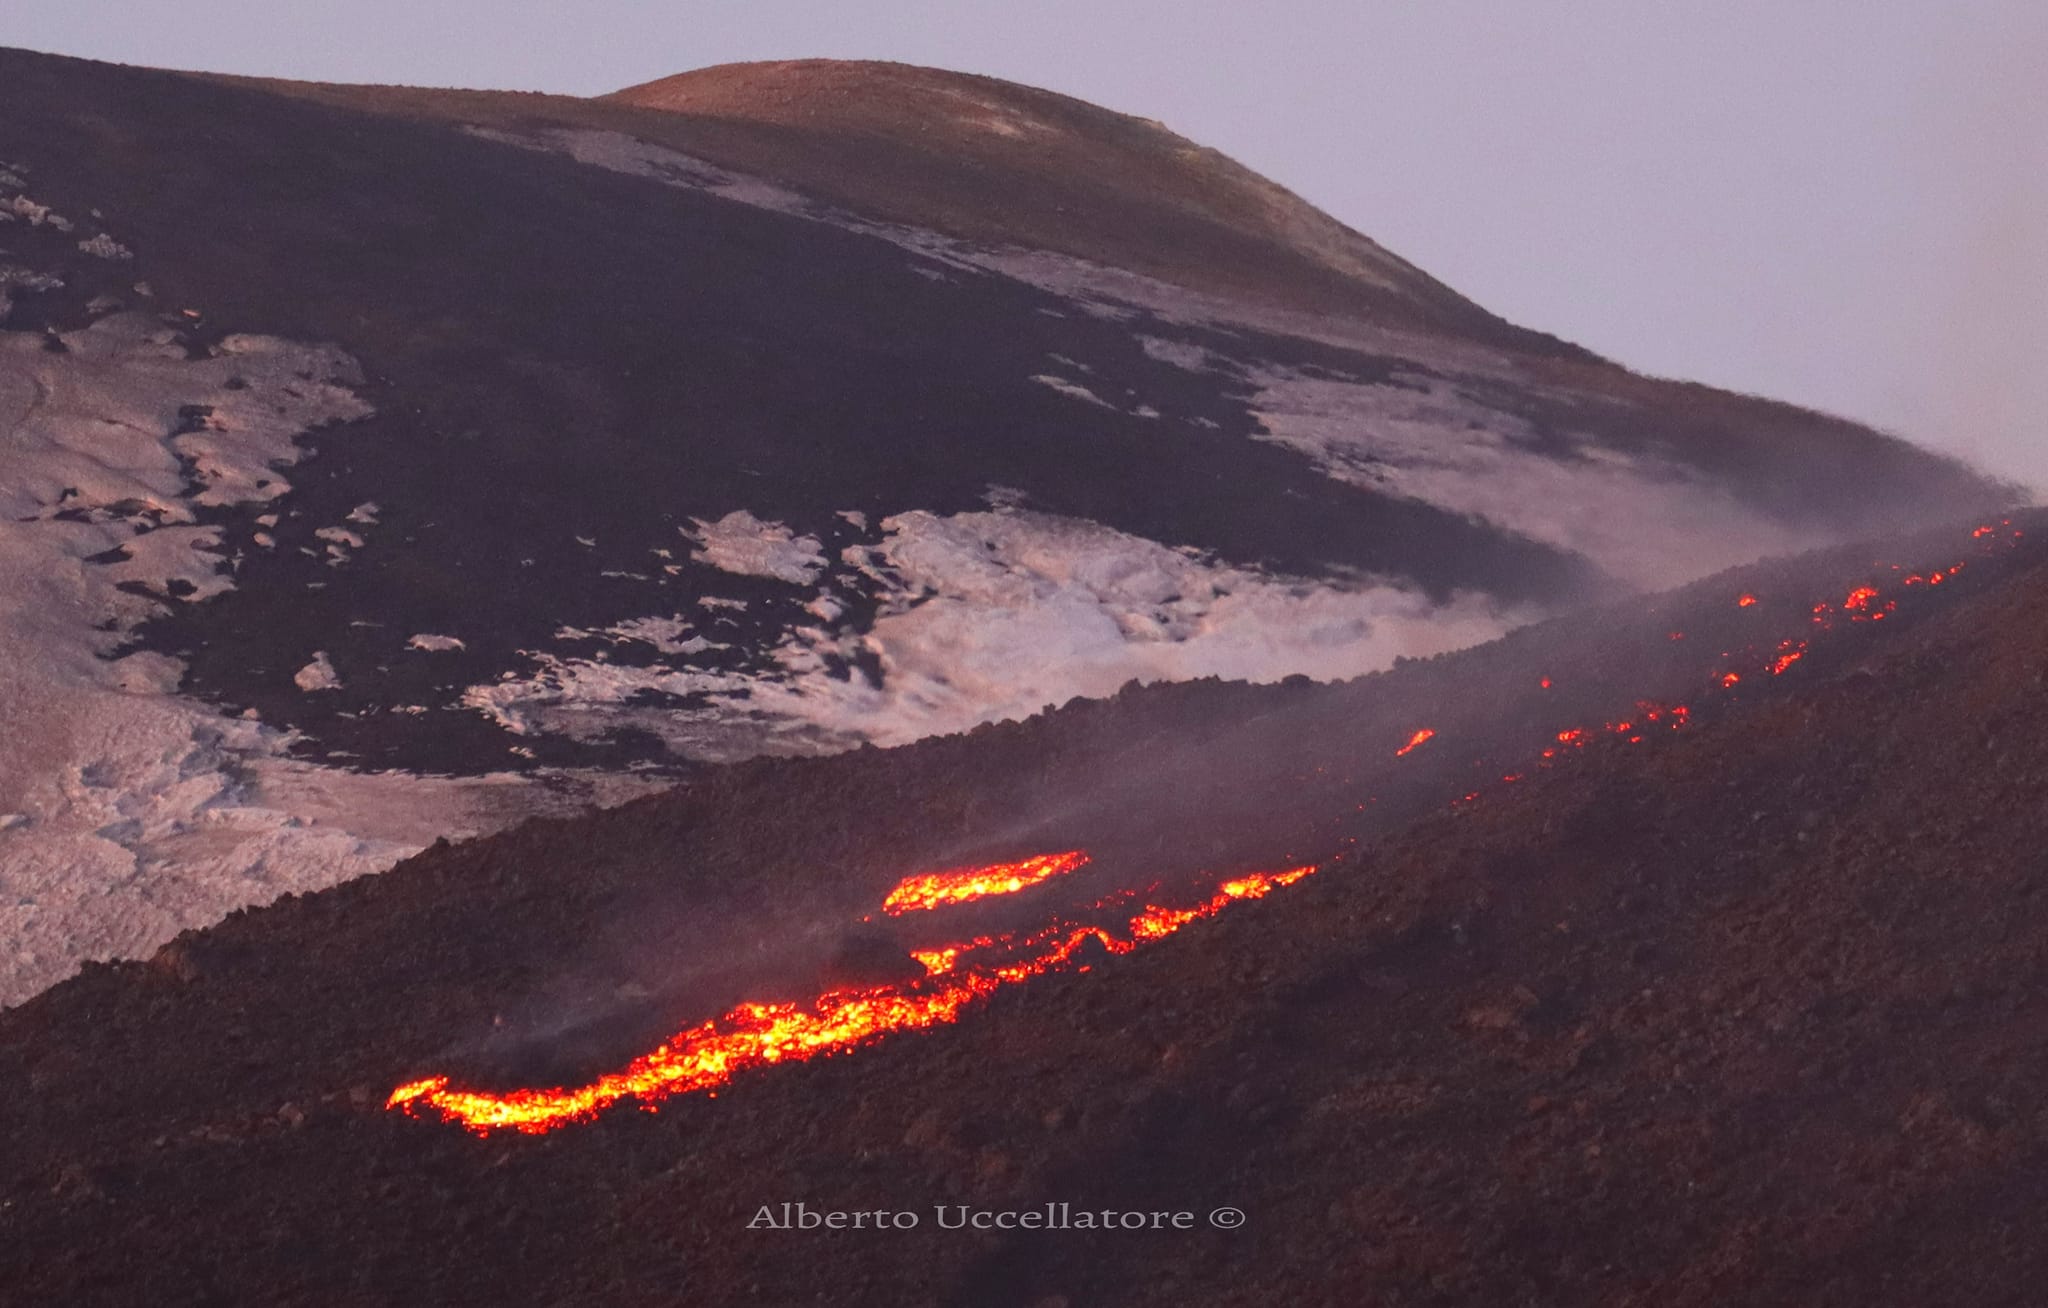 The lava flow from the SE crater (image: Alberto Uccellatore)